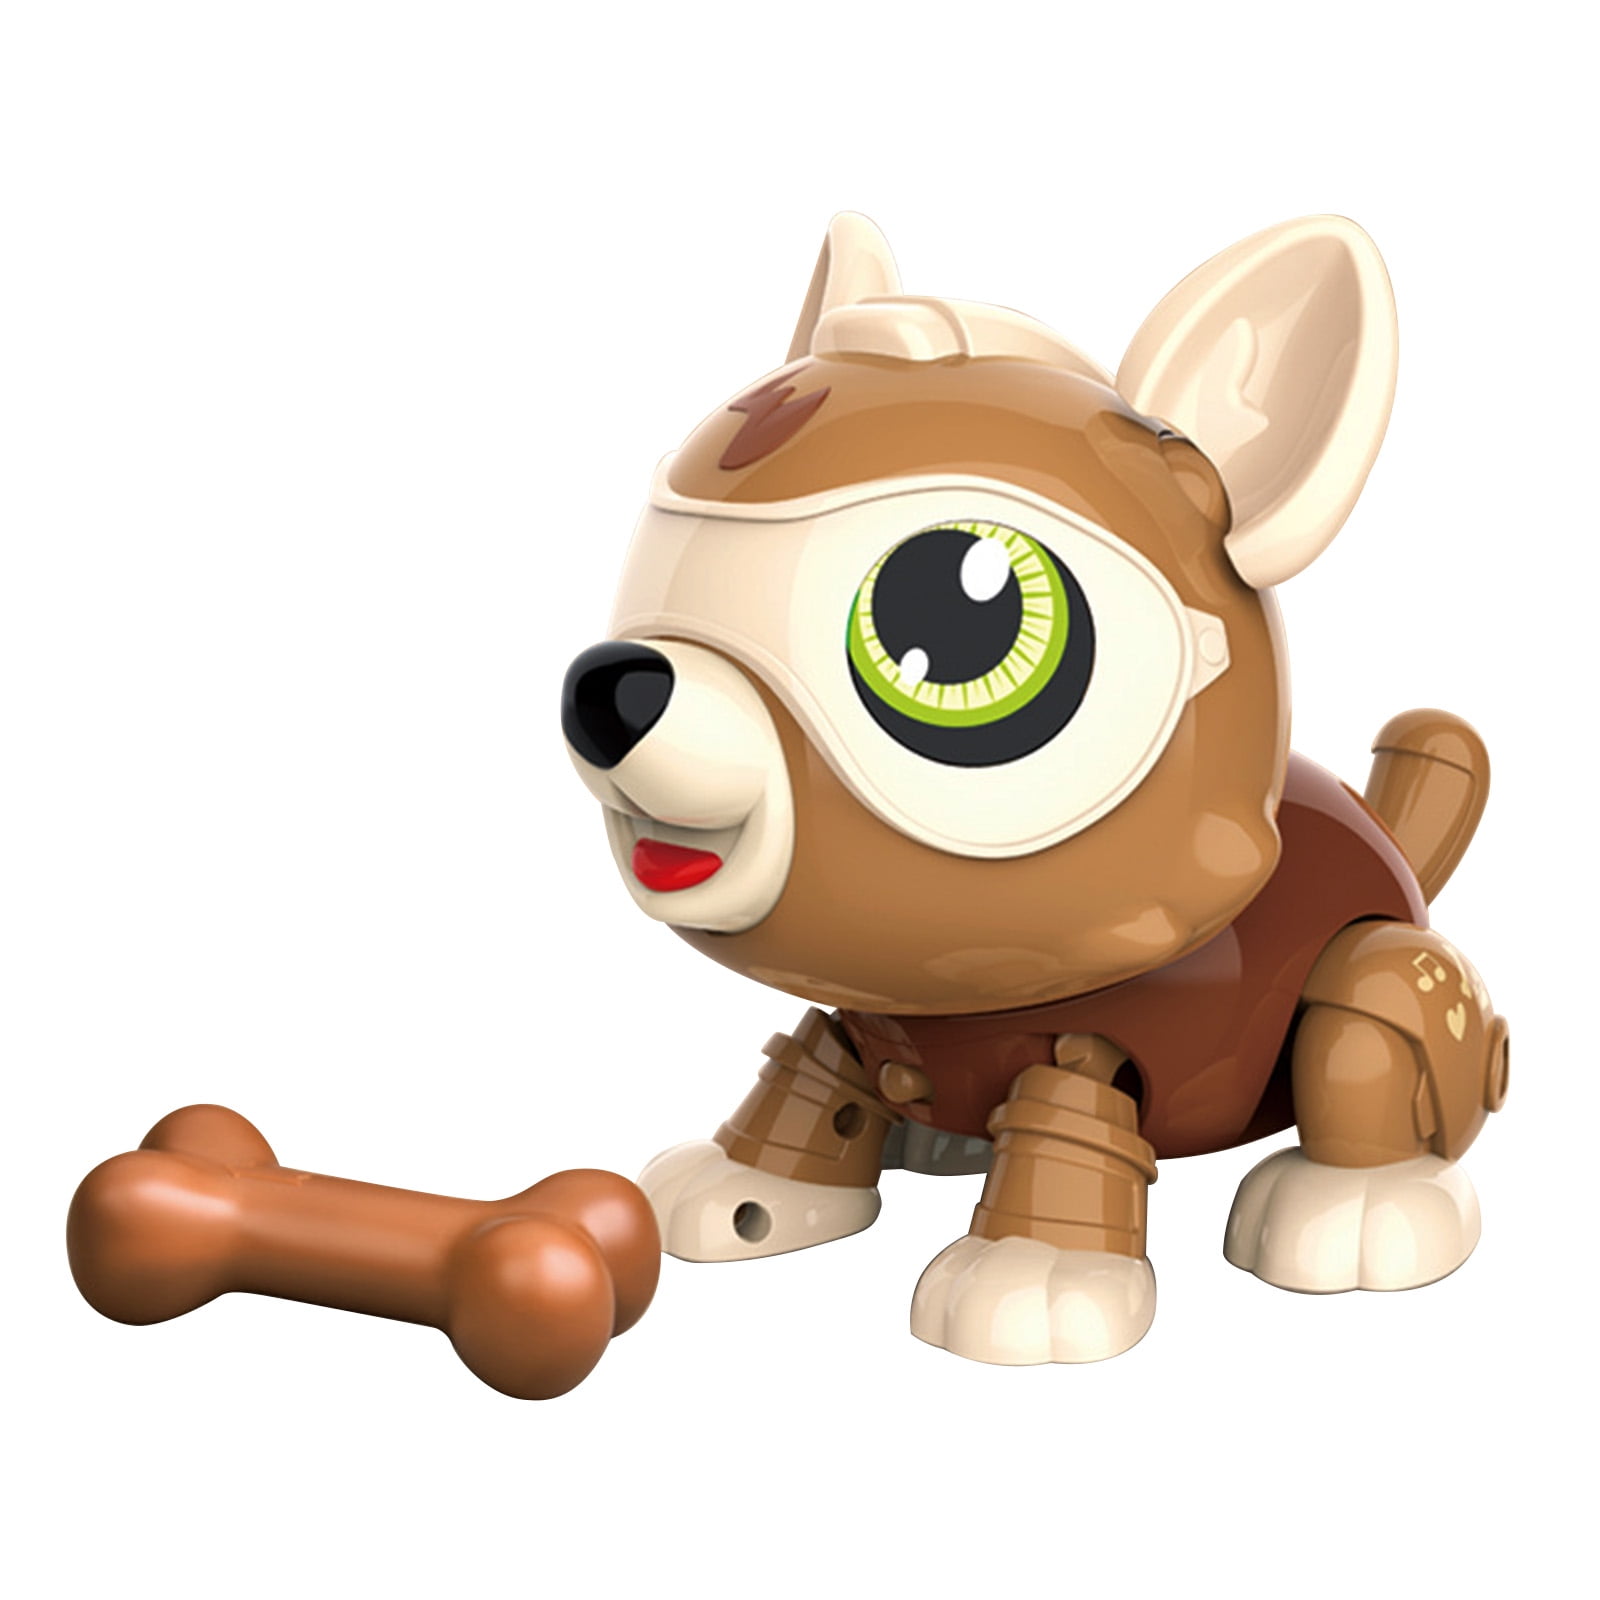 Toys Battery operated 3+ Inteligente Puppy 